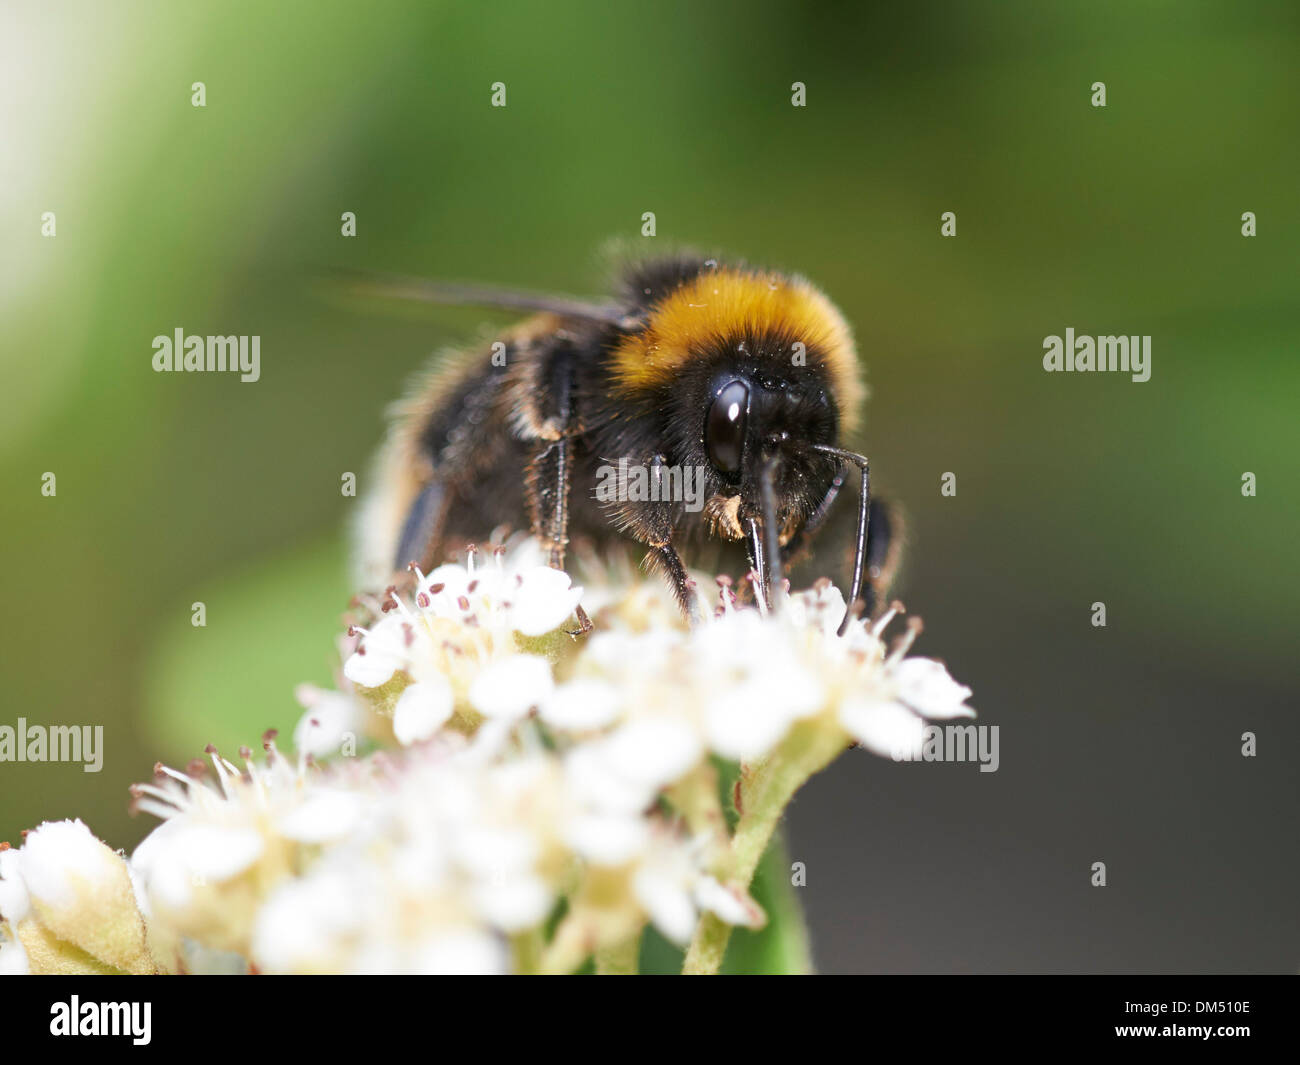 Buff-tailed bumblebee on flowering plant. Stock Photo